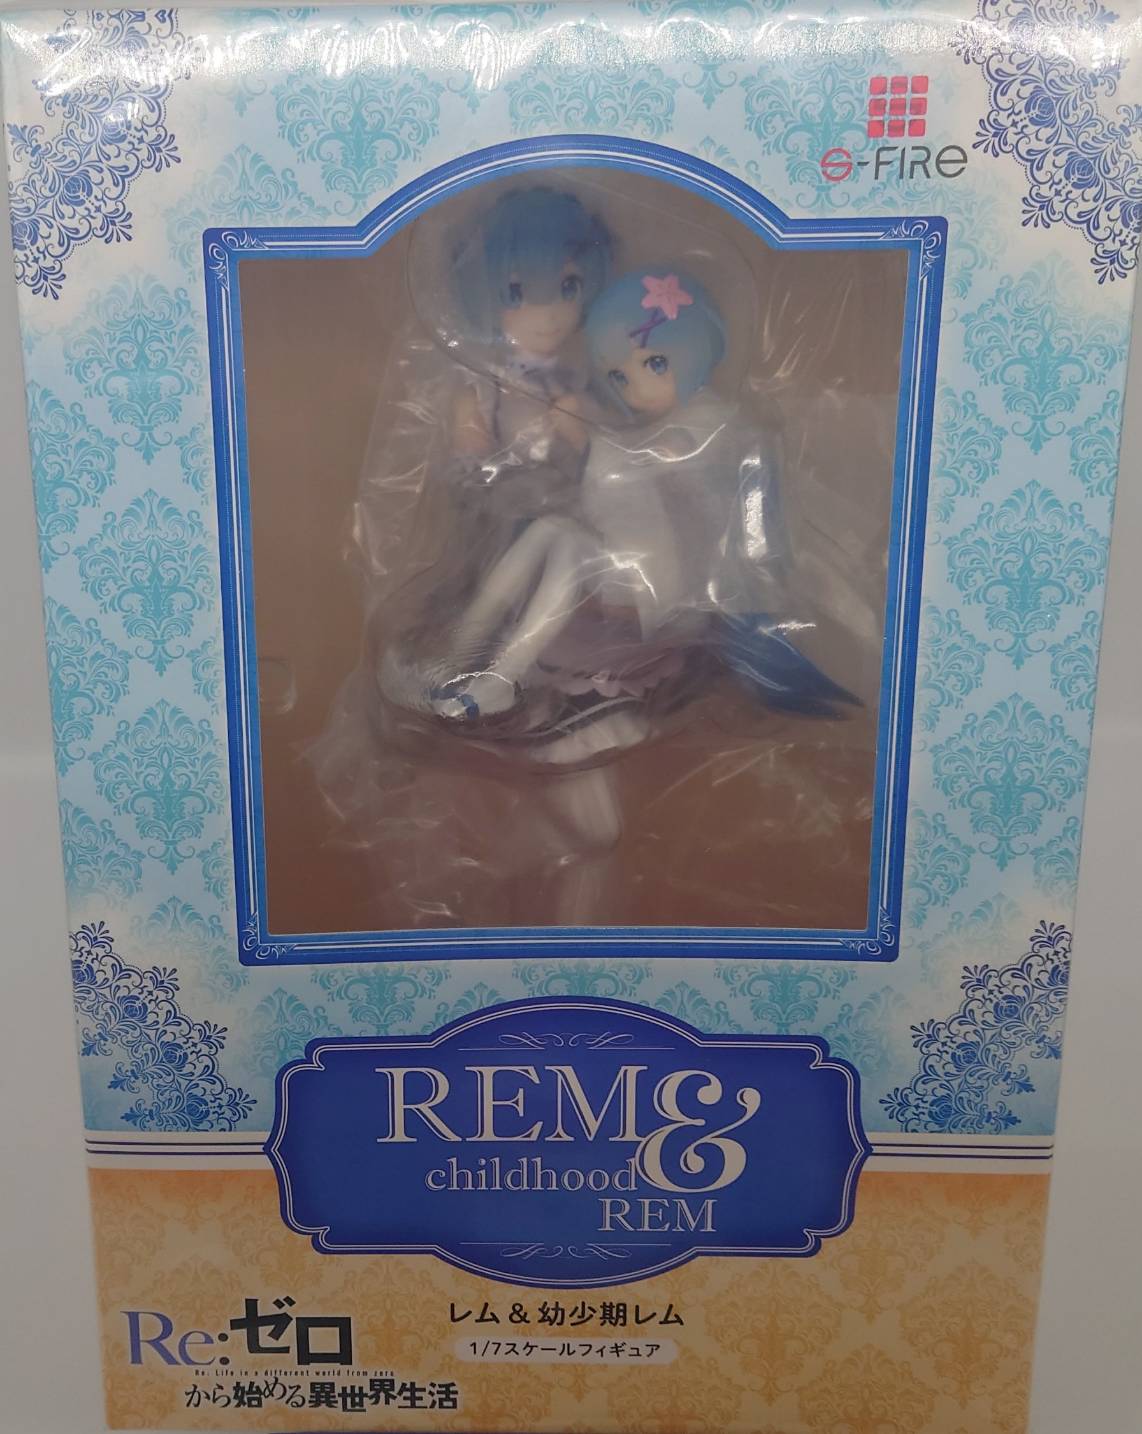 Sega S-FIRE Rem & Childhood Rem 1/7 PVC Figure (Re:ZERO -Starting Life in Another World)